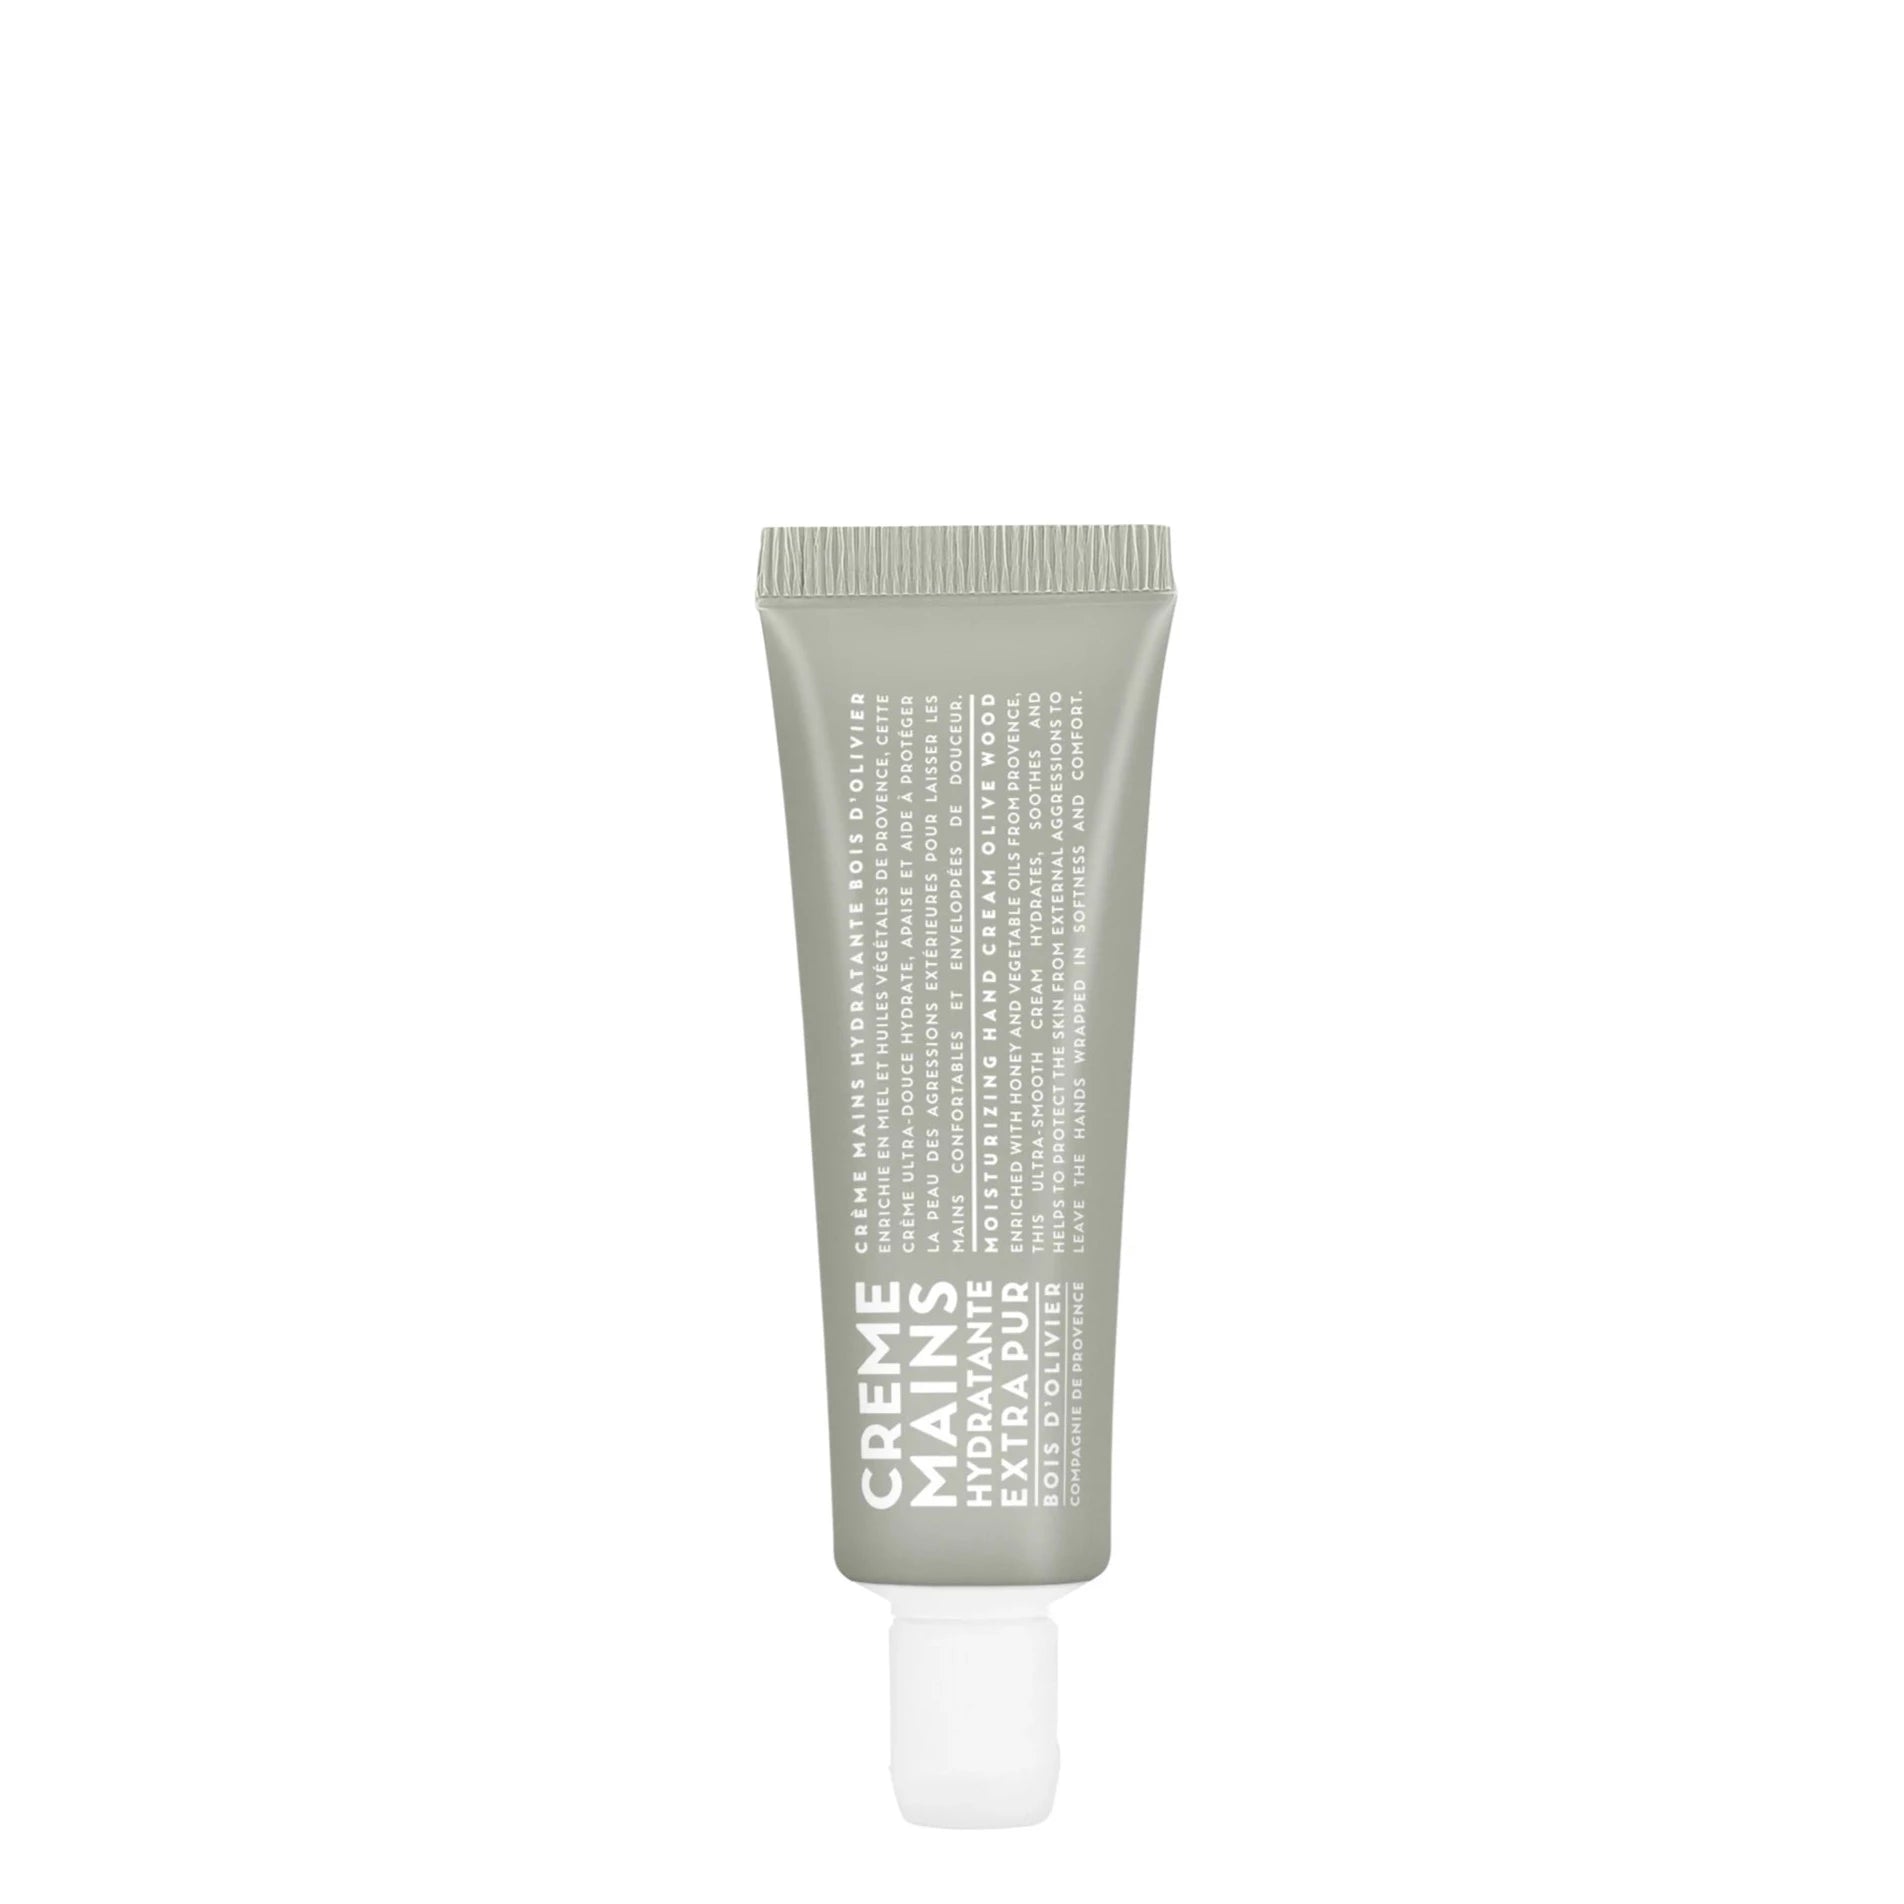 grey tube with white text and white cap for the Olive wood travel hand cream